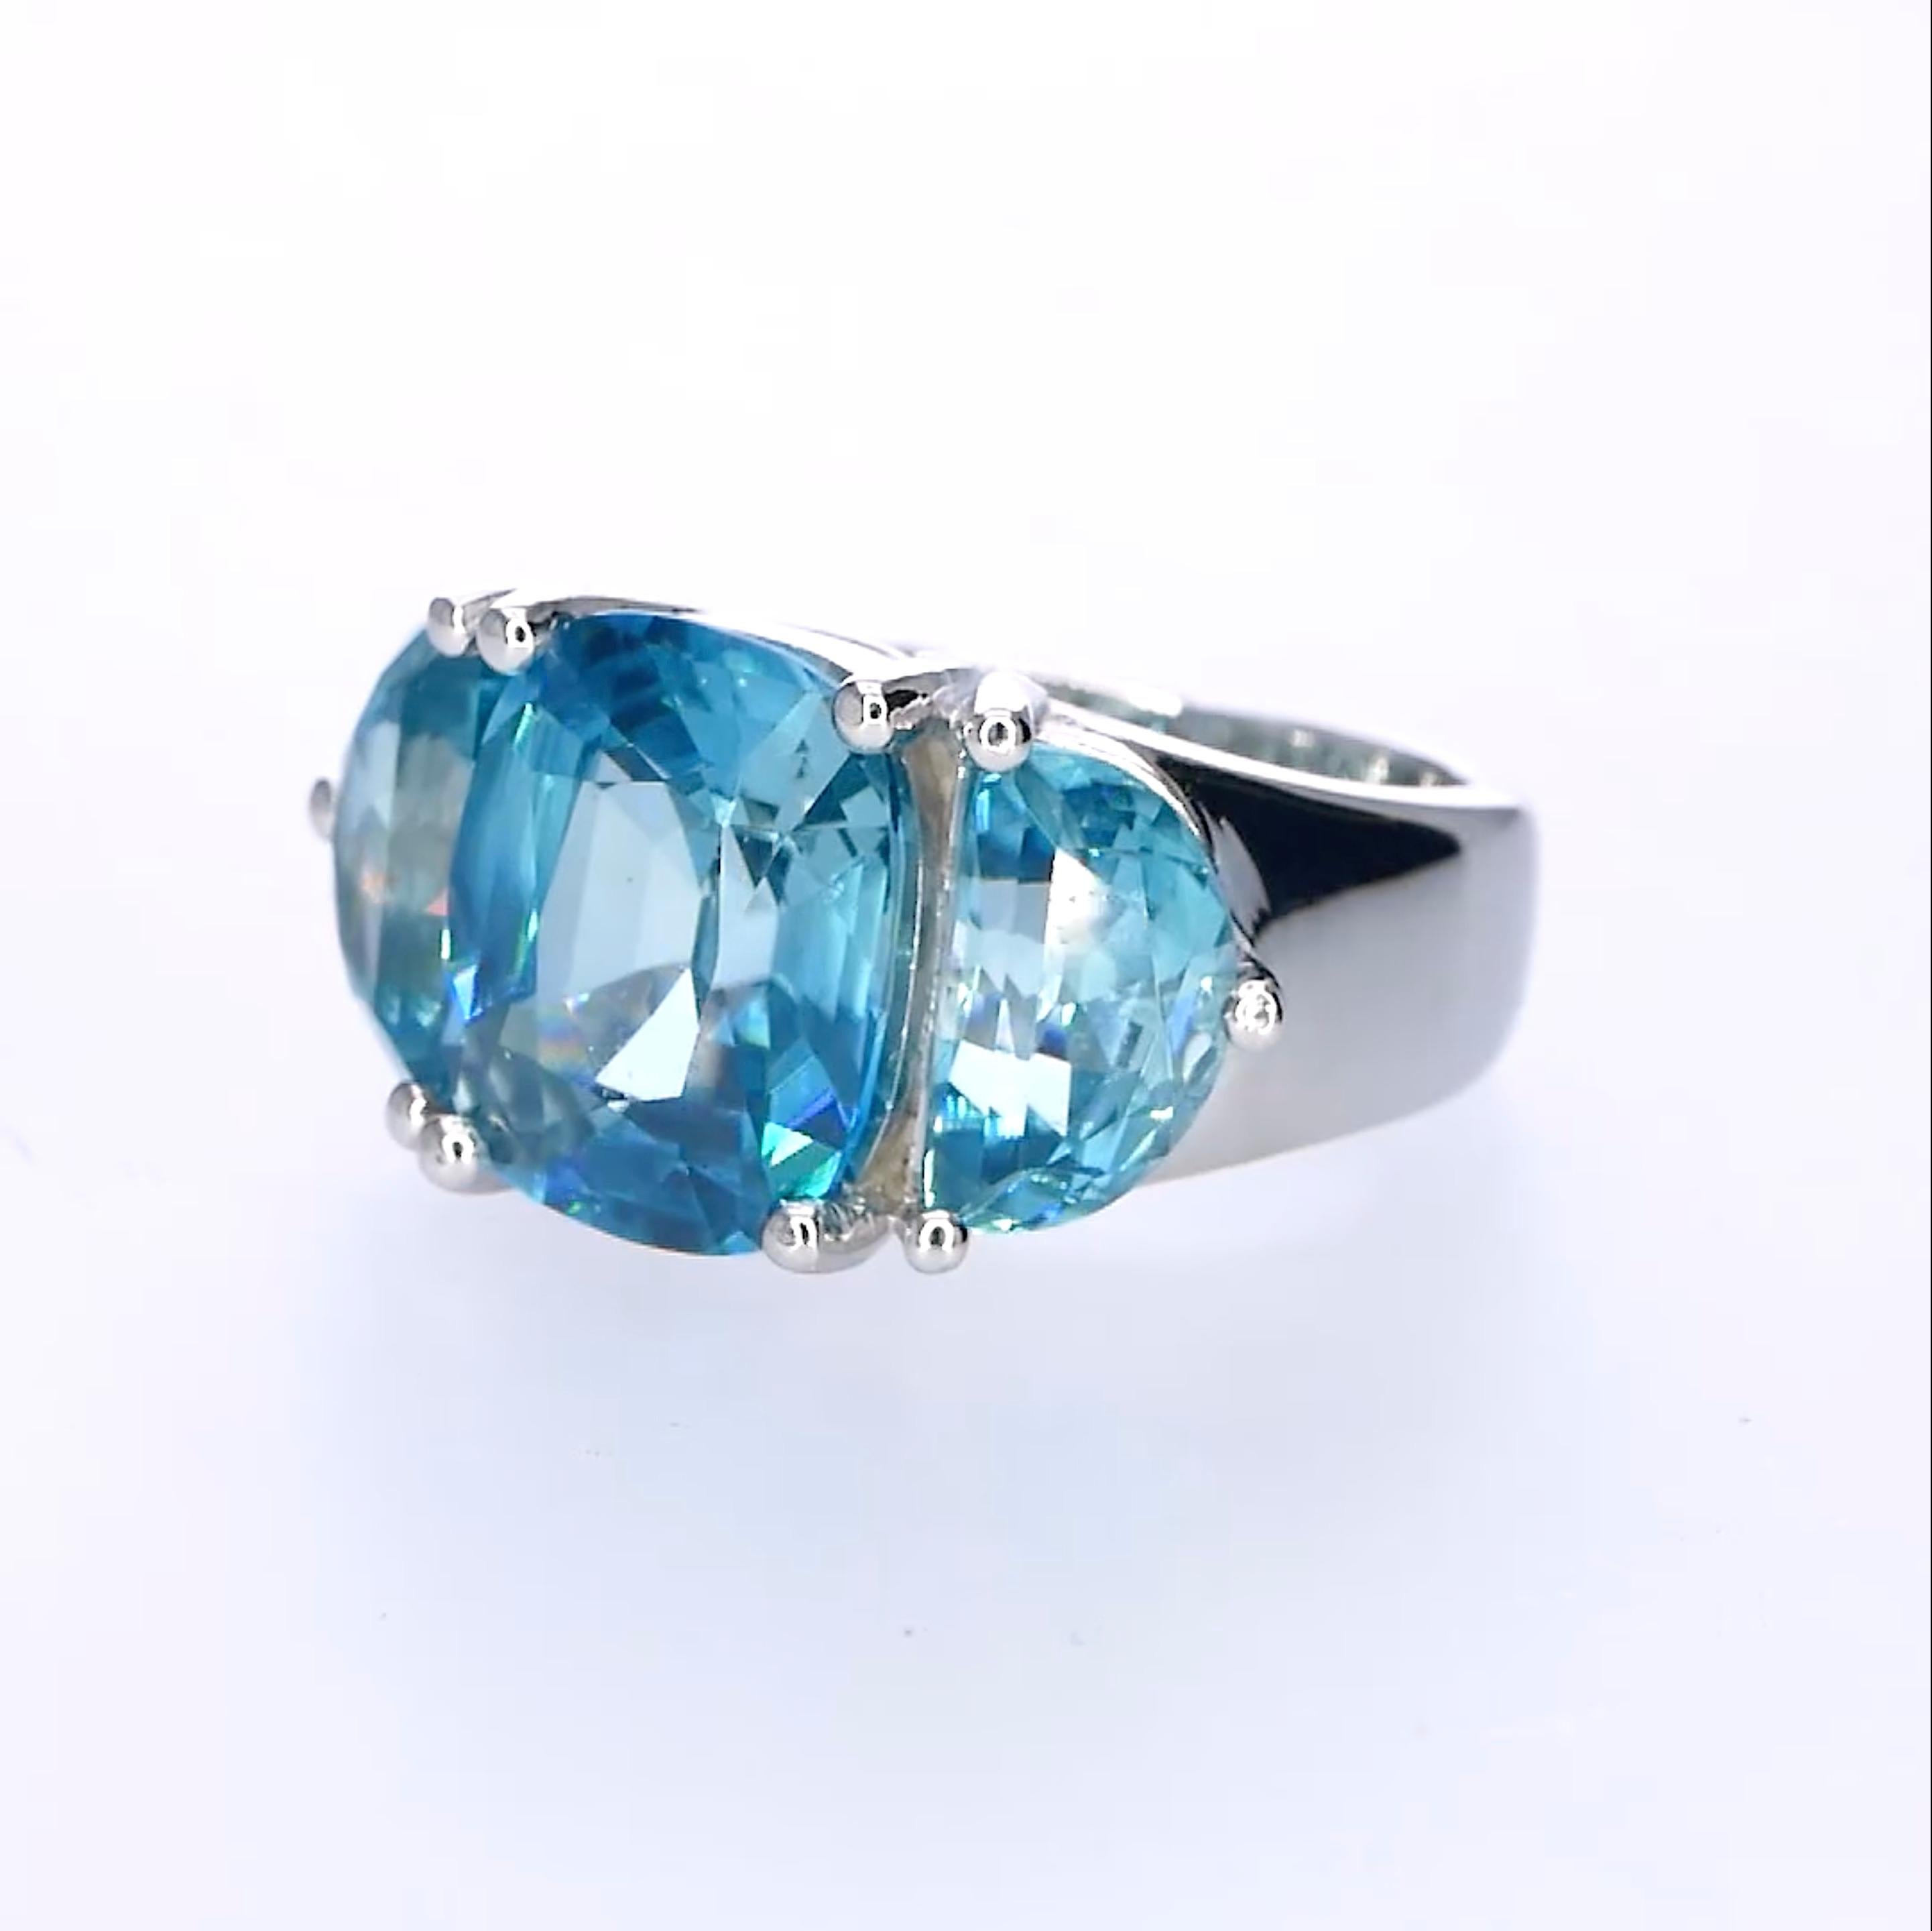 Mixed Cut Orloff of Denmark, 14.4 ct Natural Blue Zircon Ring in 925 Sterling Silver For Sale